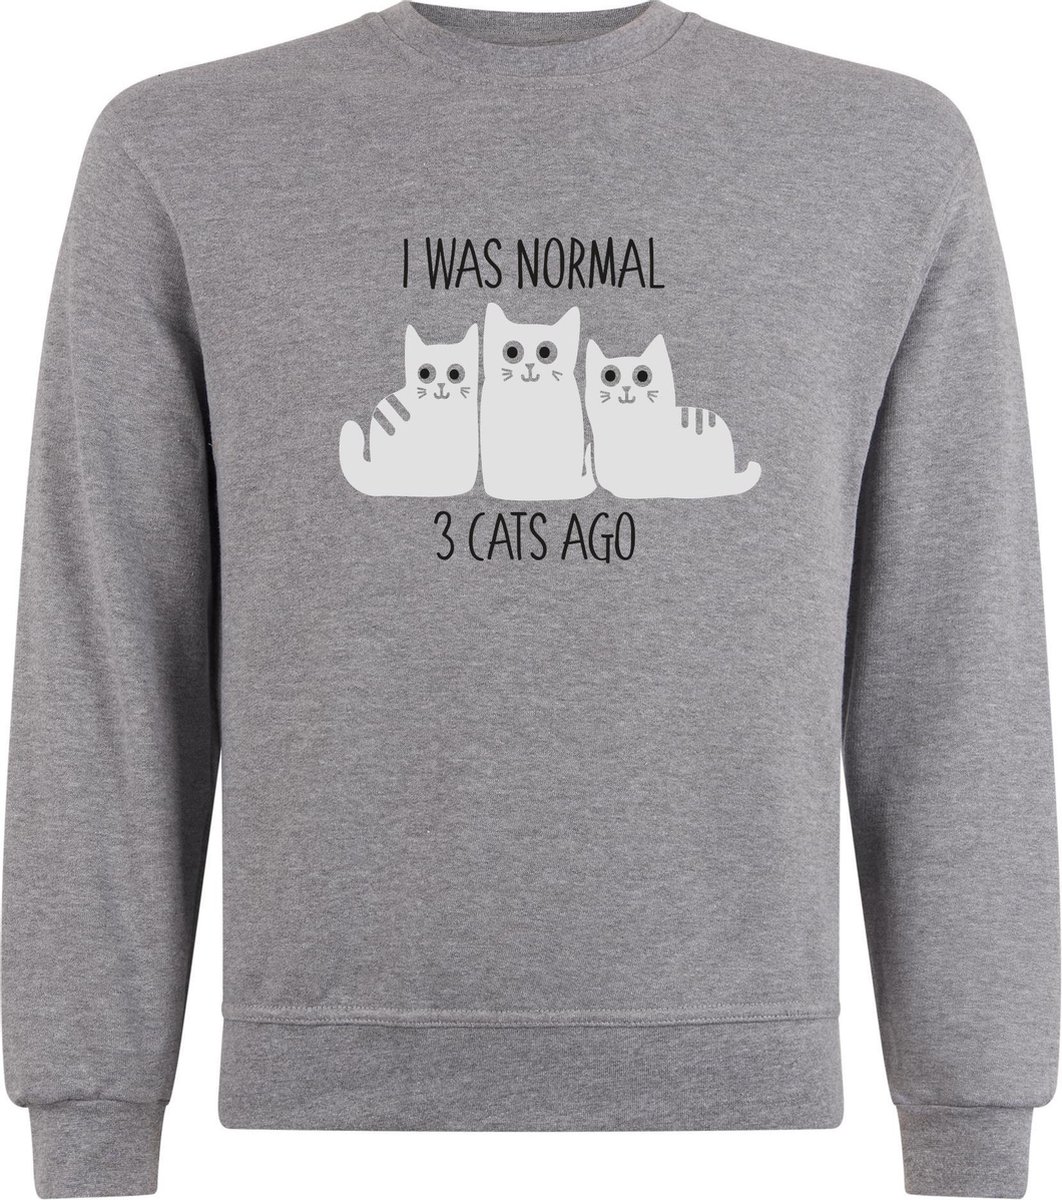 Sweater zonder capuchon - Jumper - Trui - Vest - Lifestyle sweater - Chill Sweater - Kat - Cat - I was normal 3 cats ago - S.Grey - L